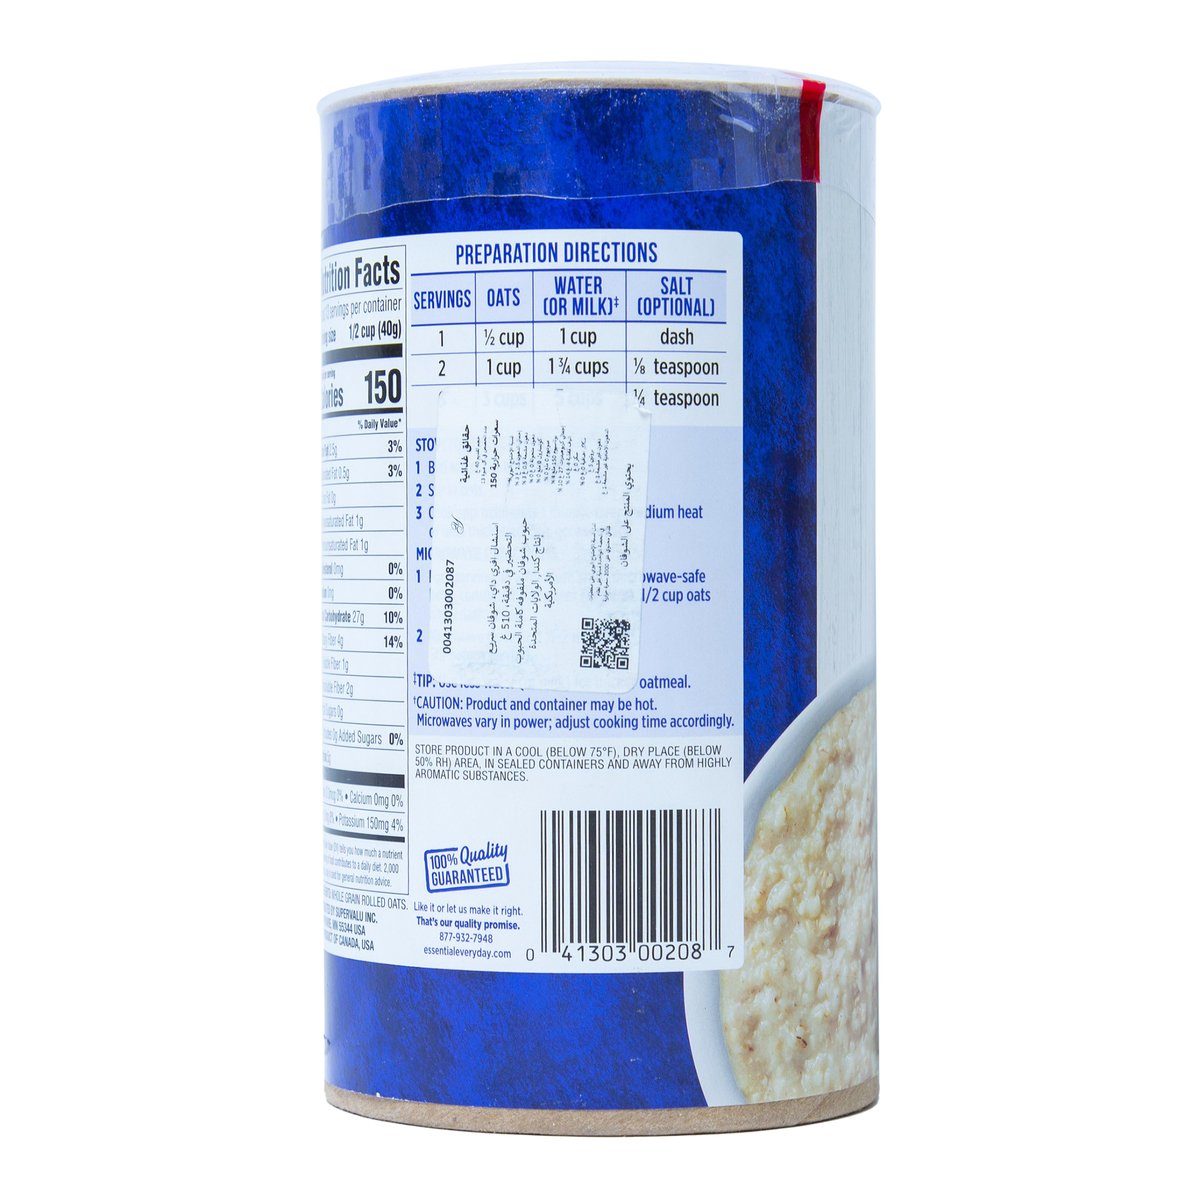 Essential Everyday Quick Oats 510 g